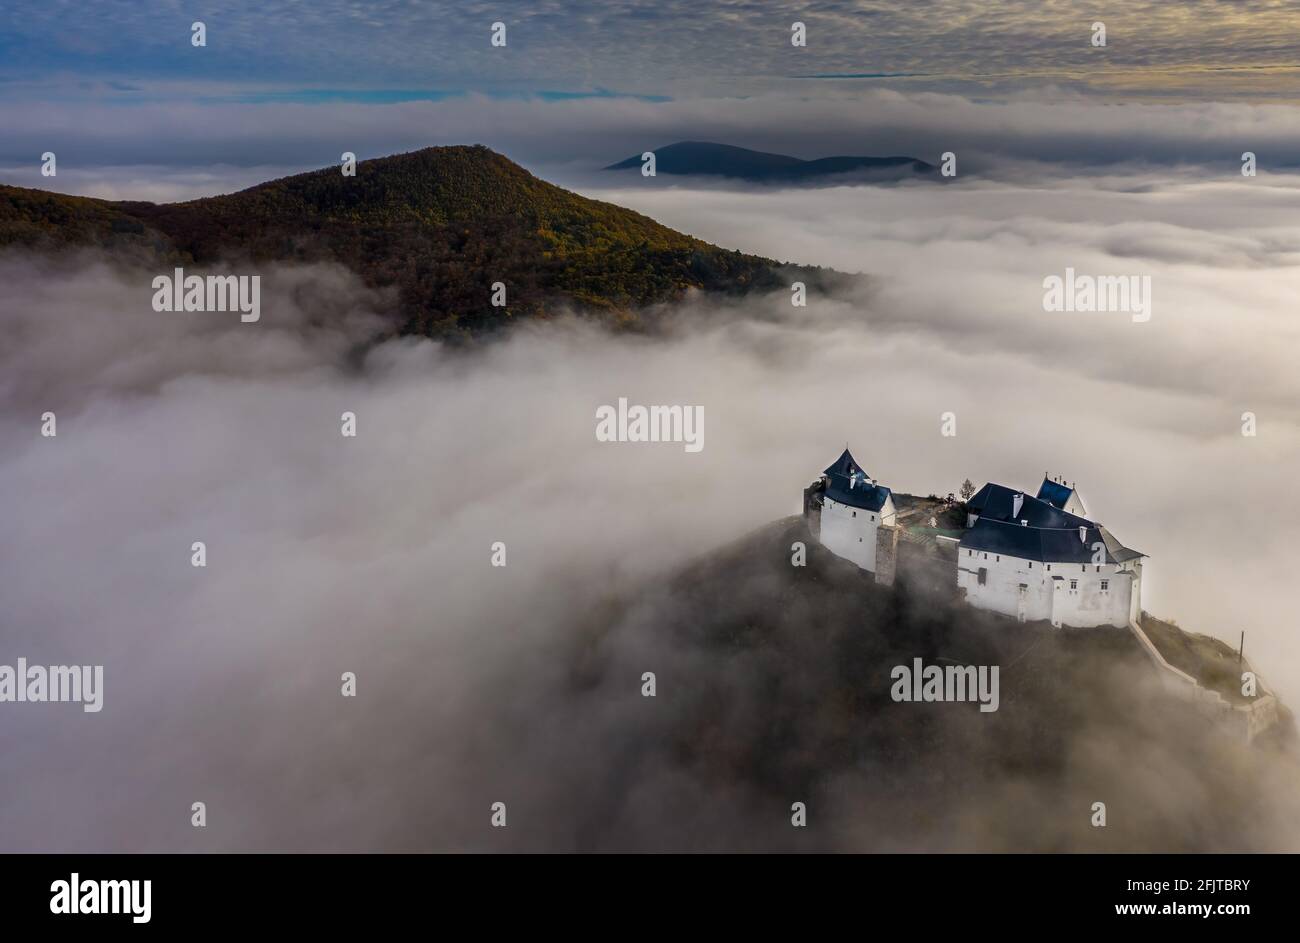 Fuzer, Hungary - Aerial panoramic view of the beautiful Castle of Fuzer standing out of the fog on an foggy autumn morning with Zemplen Mountains and Stock Photo